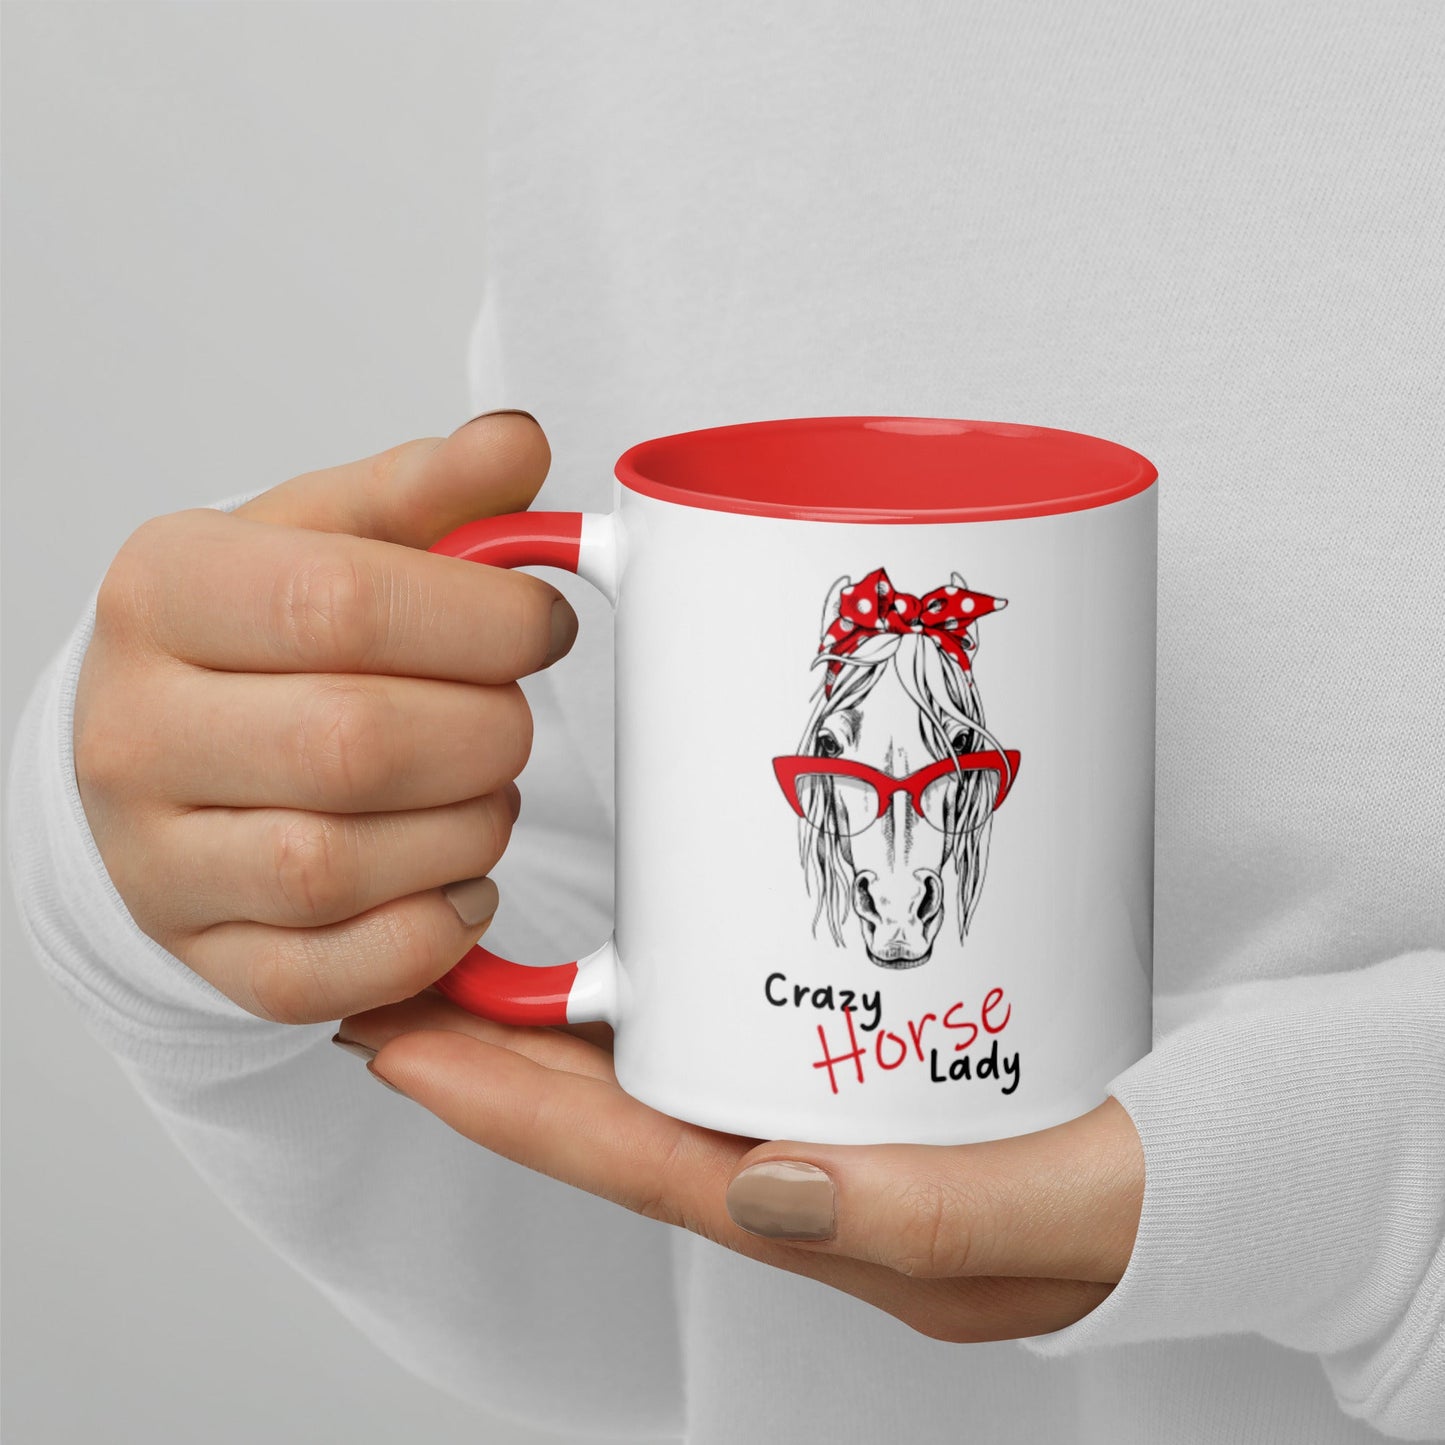 Crazy Horse Lady Mug (in-store)